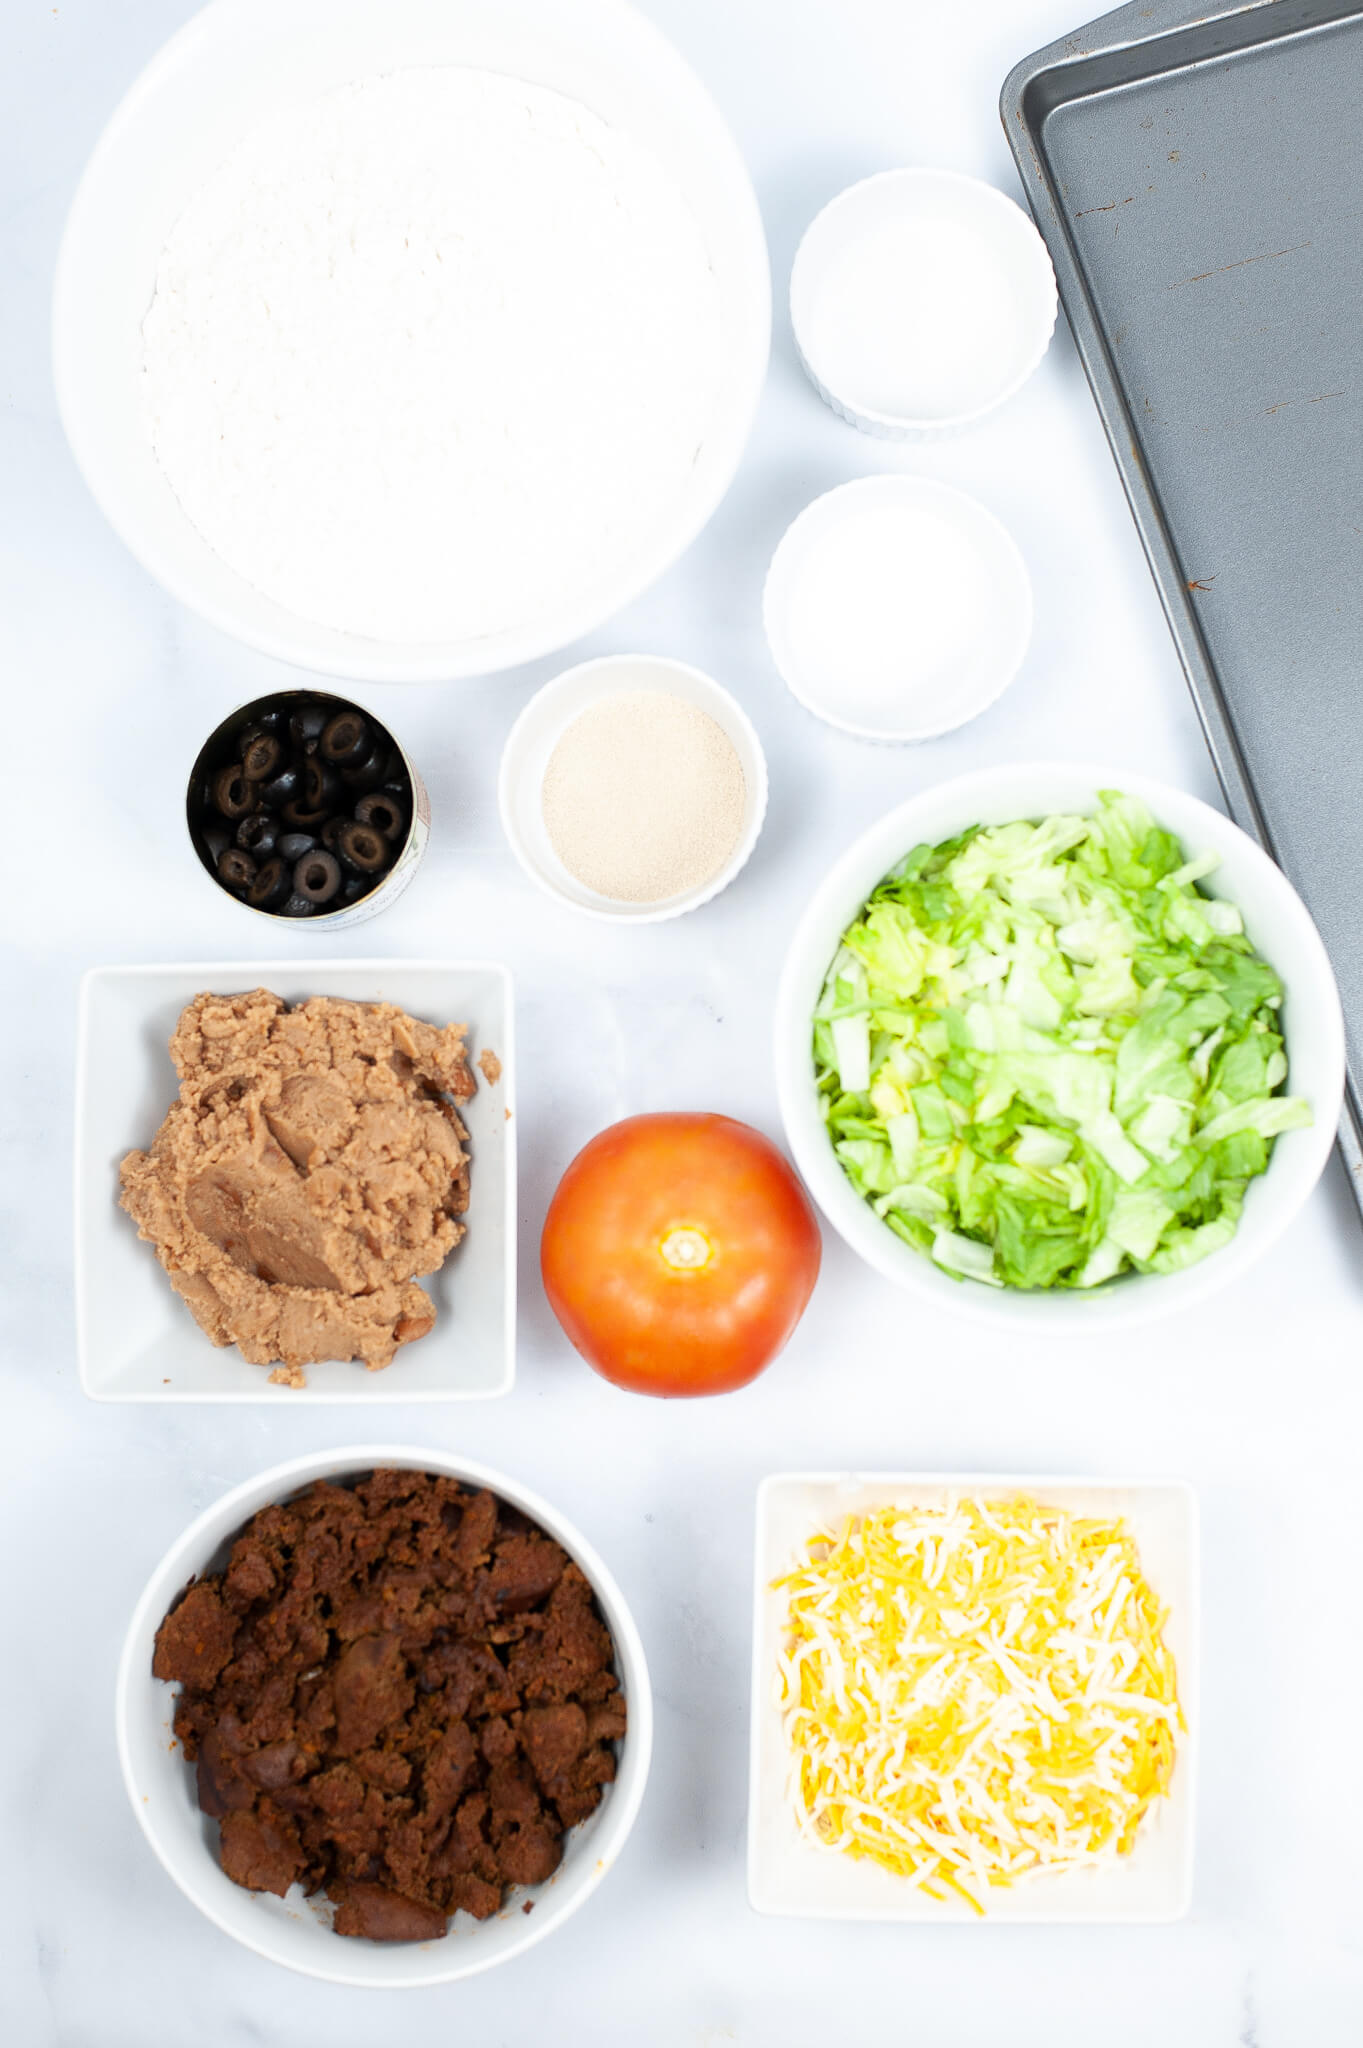 Ingredients for a Mexican pizza recipe laid out on a table, including flour, olives, yeast, lettuce, refried beans, tomato, ground meat, and shredded cheese.